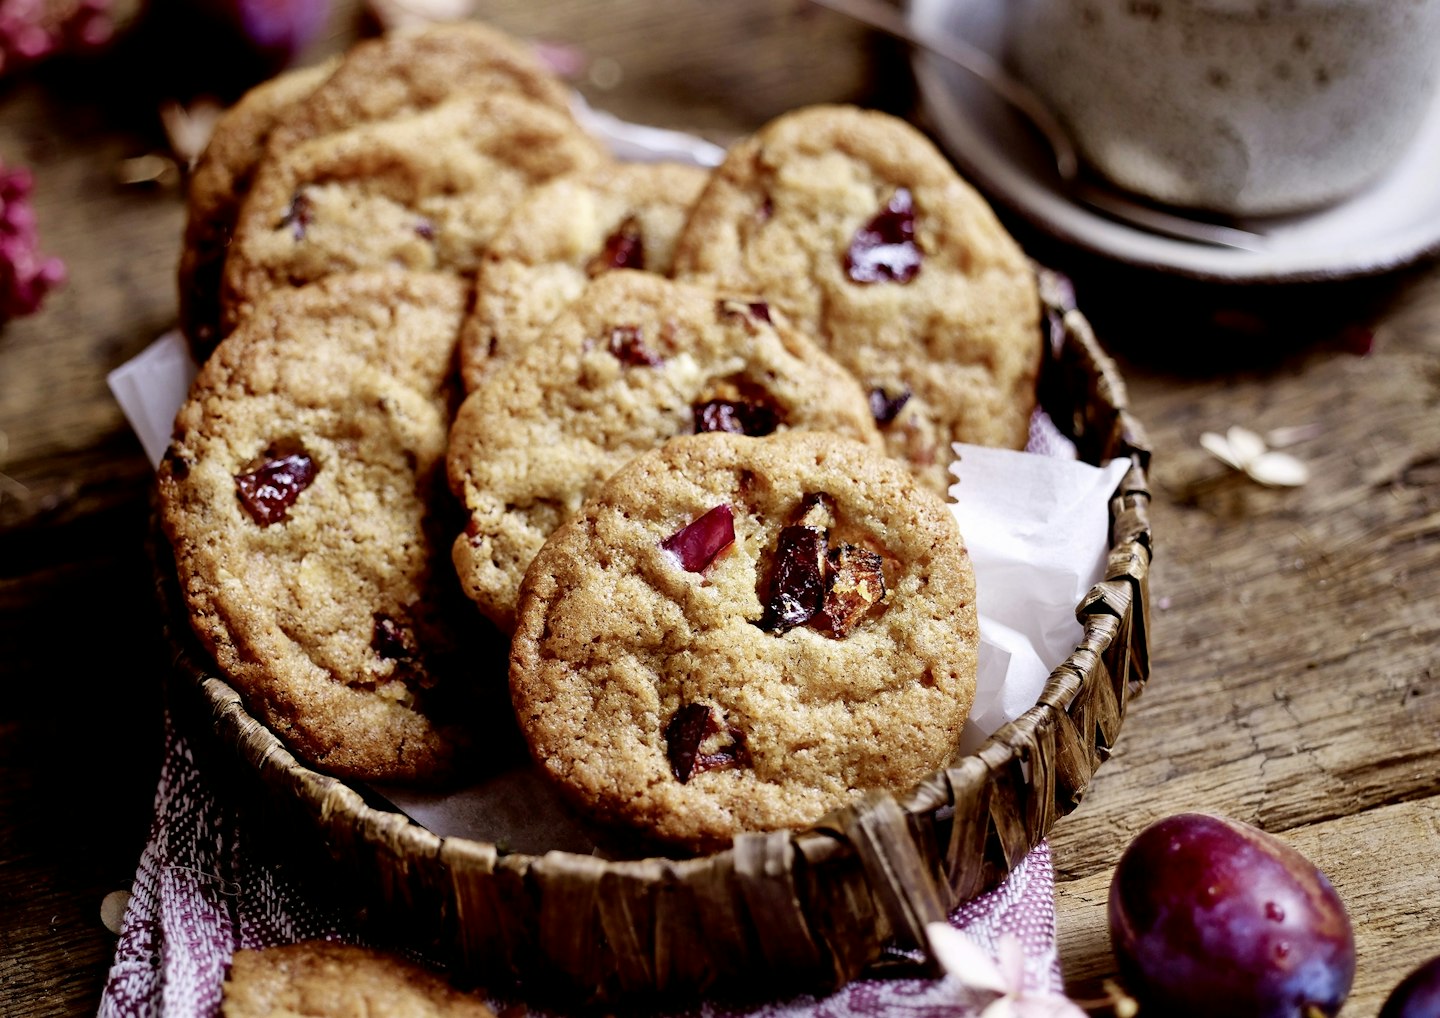 Chewy white chocolate & damson biscuits